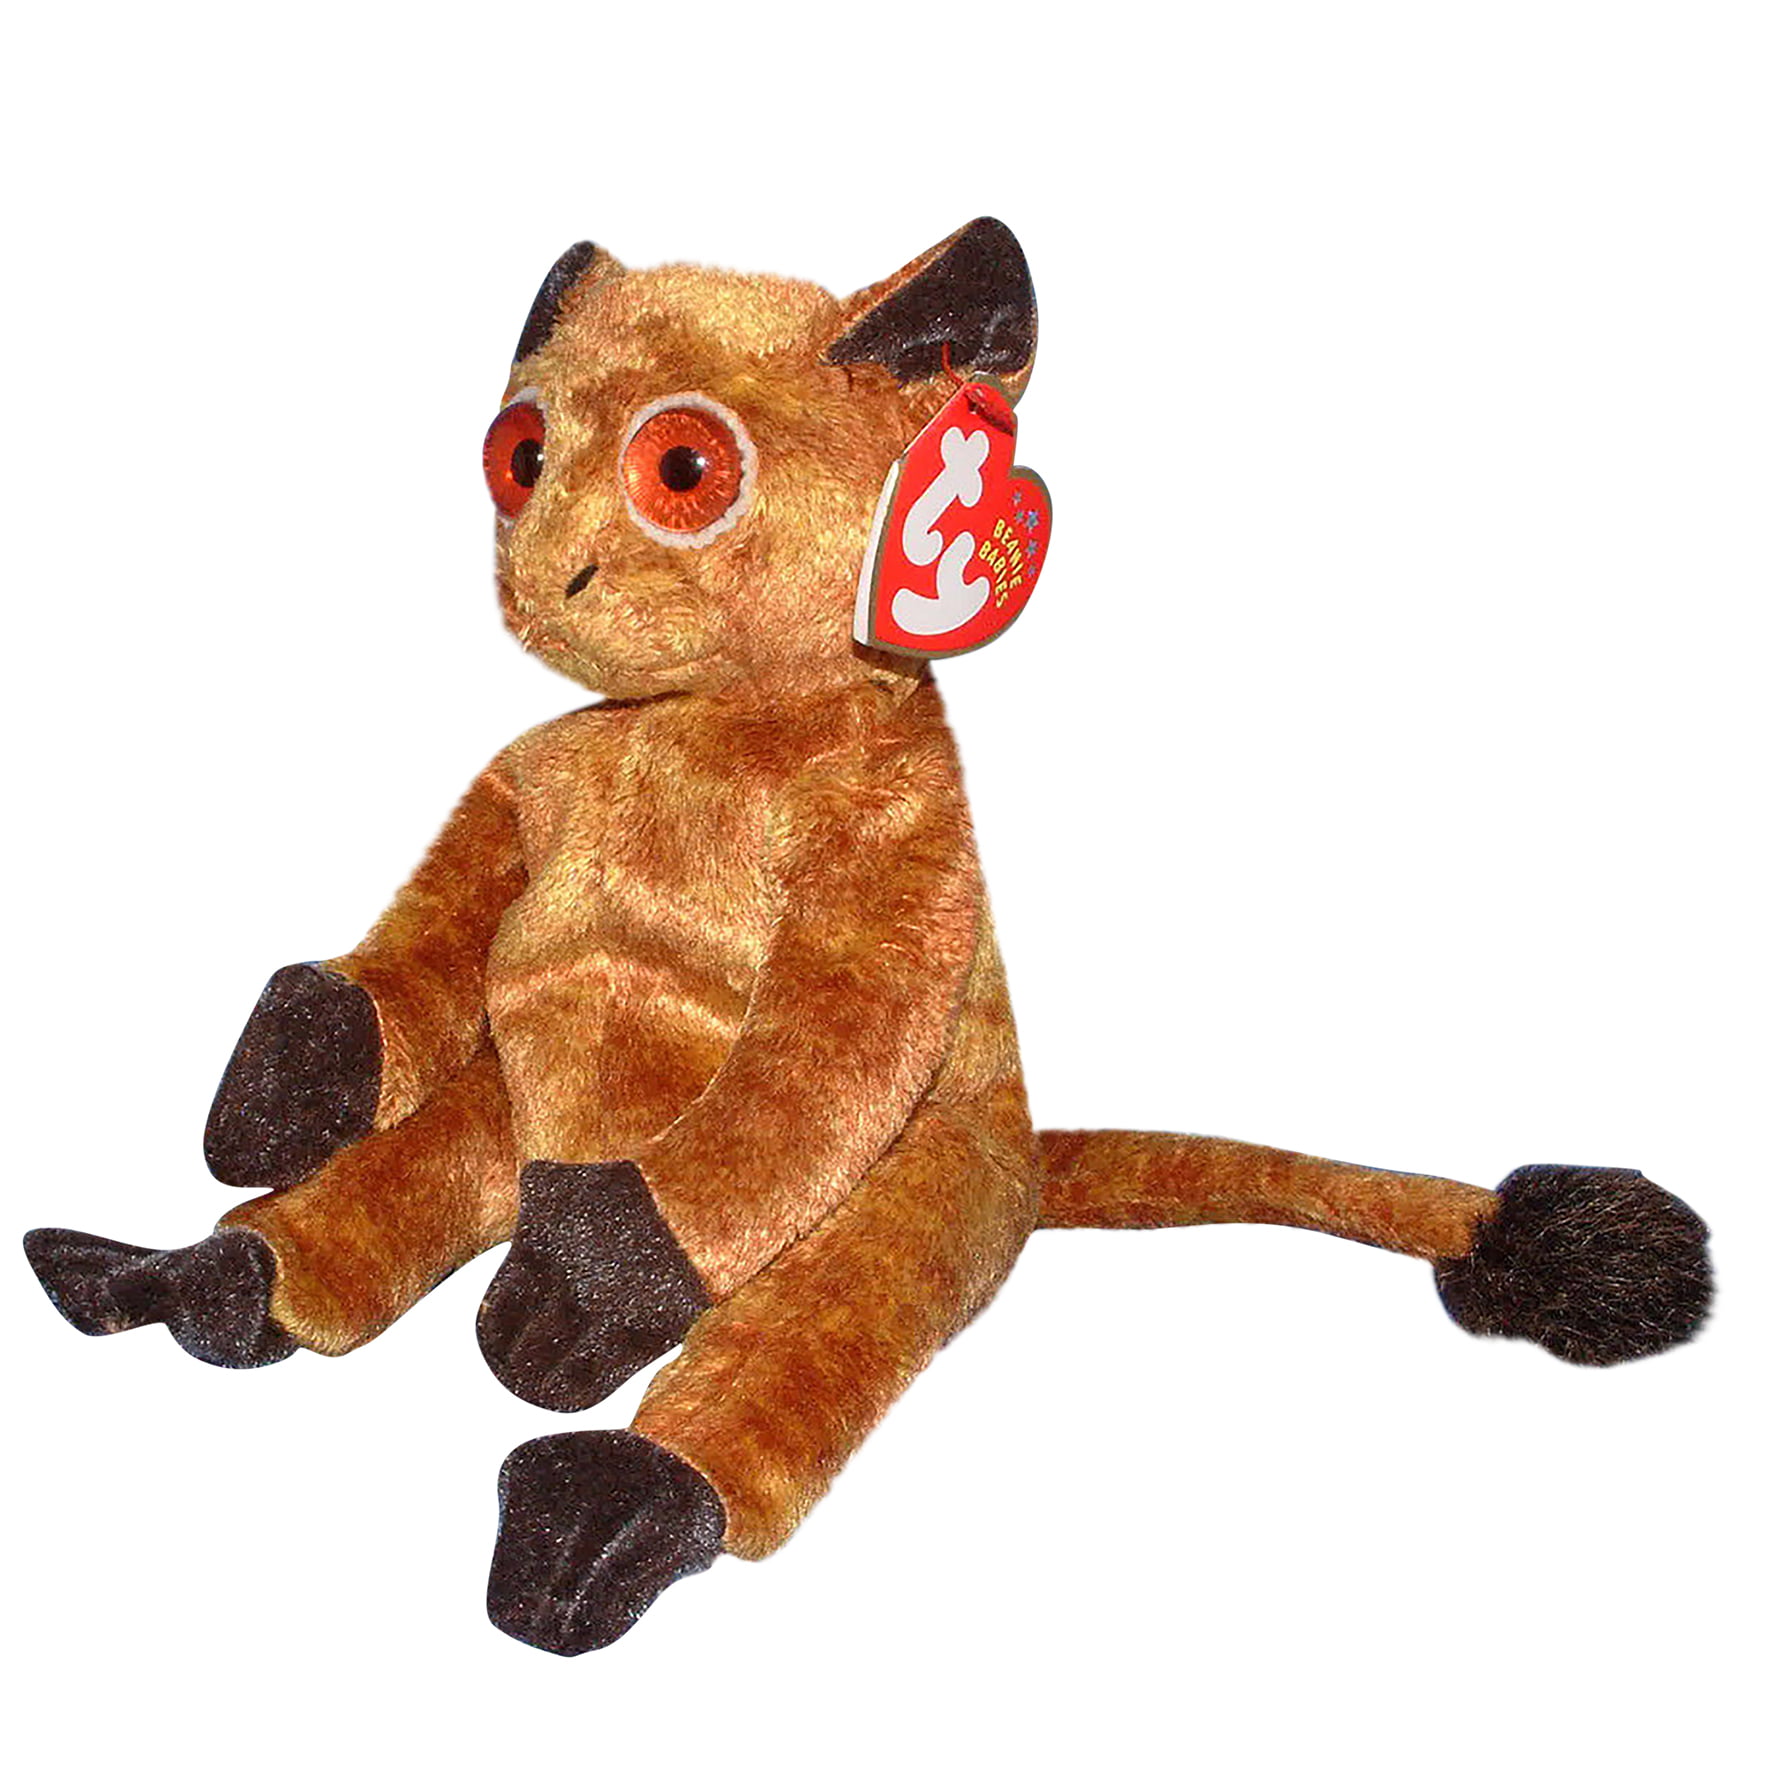 Gizmo The Lemur Ty Beanie Baby C2001 MINT Toy DOB 8/21/01 Retired for sale online 